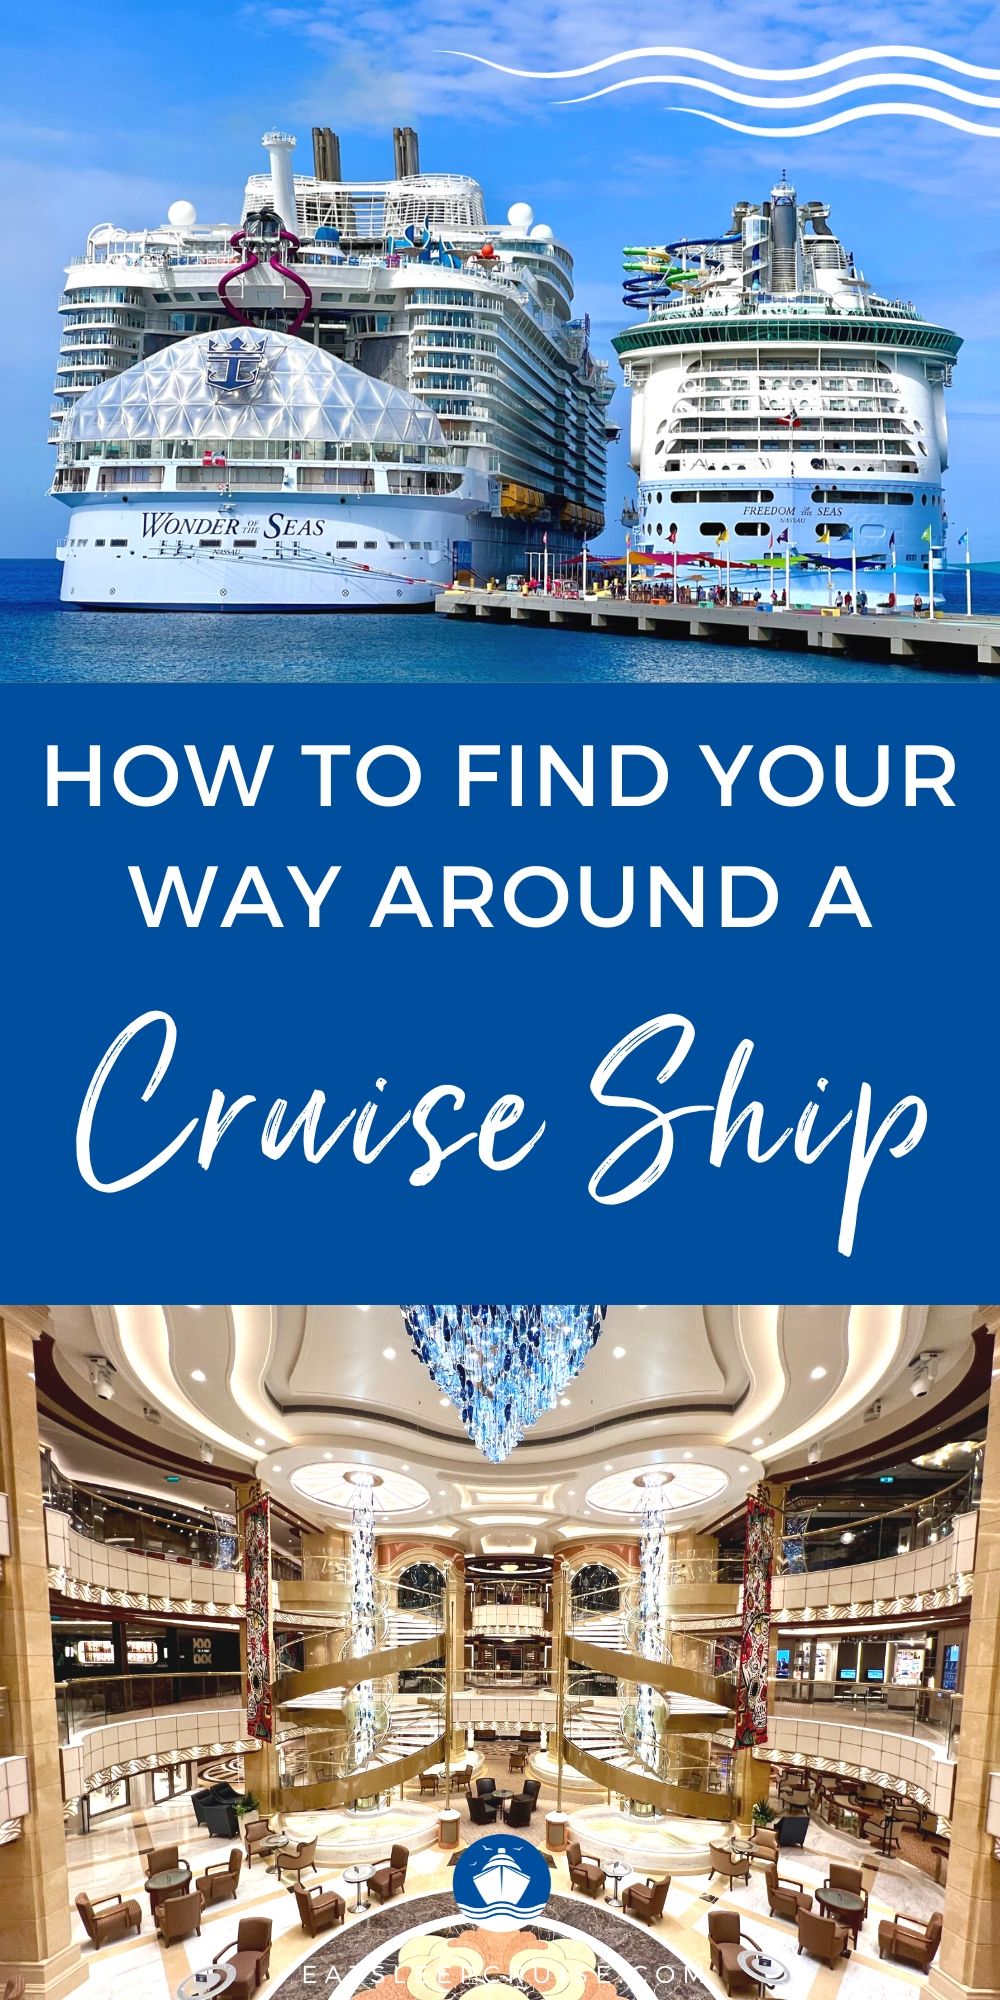 How to Find Your Way Around a Cruise Ship: Bow vs. Stern and Forward vs. Aft